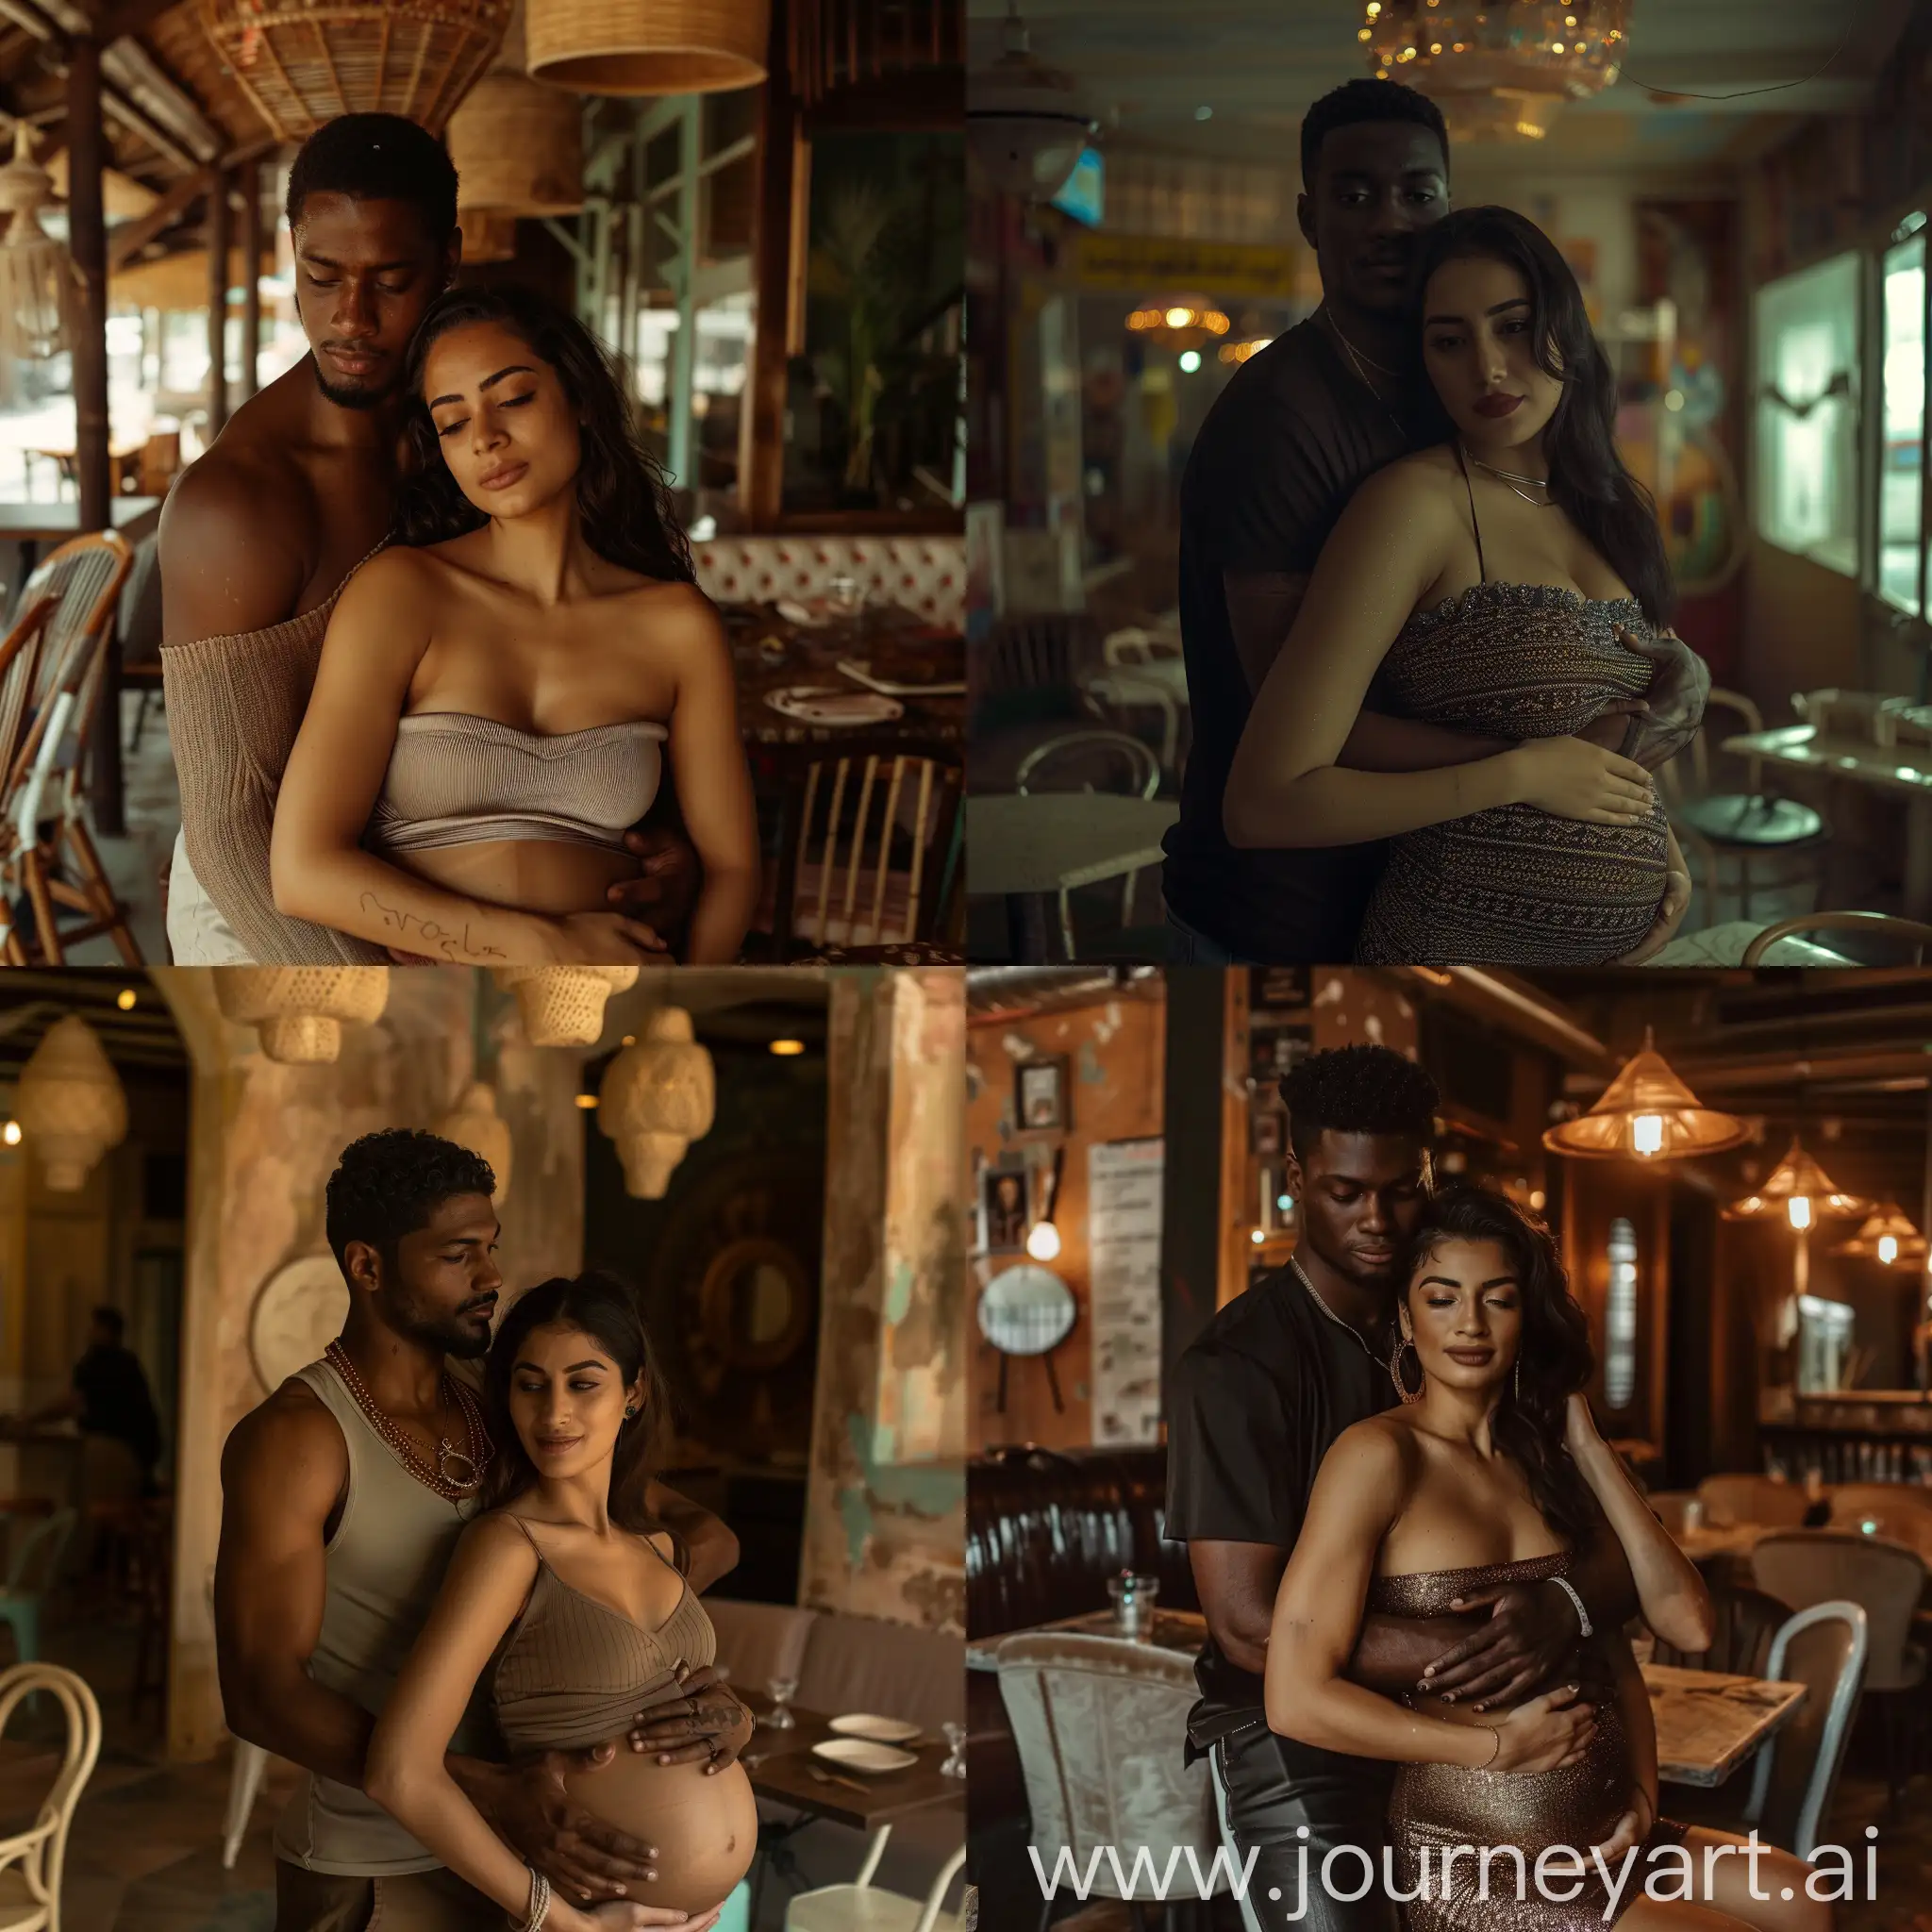 a pregnant iraqi woman in a tight tube top getting hugged by her tall african partner, both looking at the camera, he is grabbing her neck, in an open restaurant setting, The woman looks typically iraqi and is beautiful, The scene is romantic and open